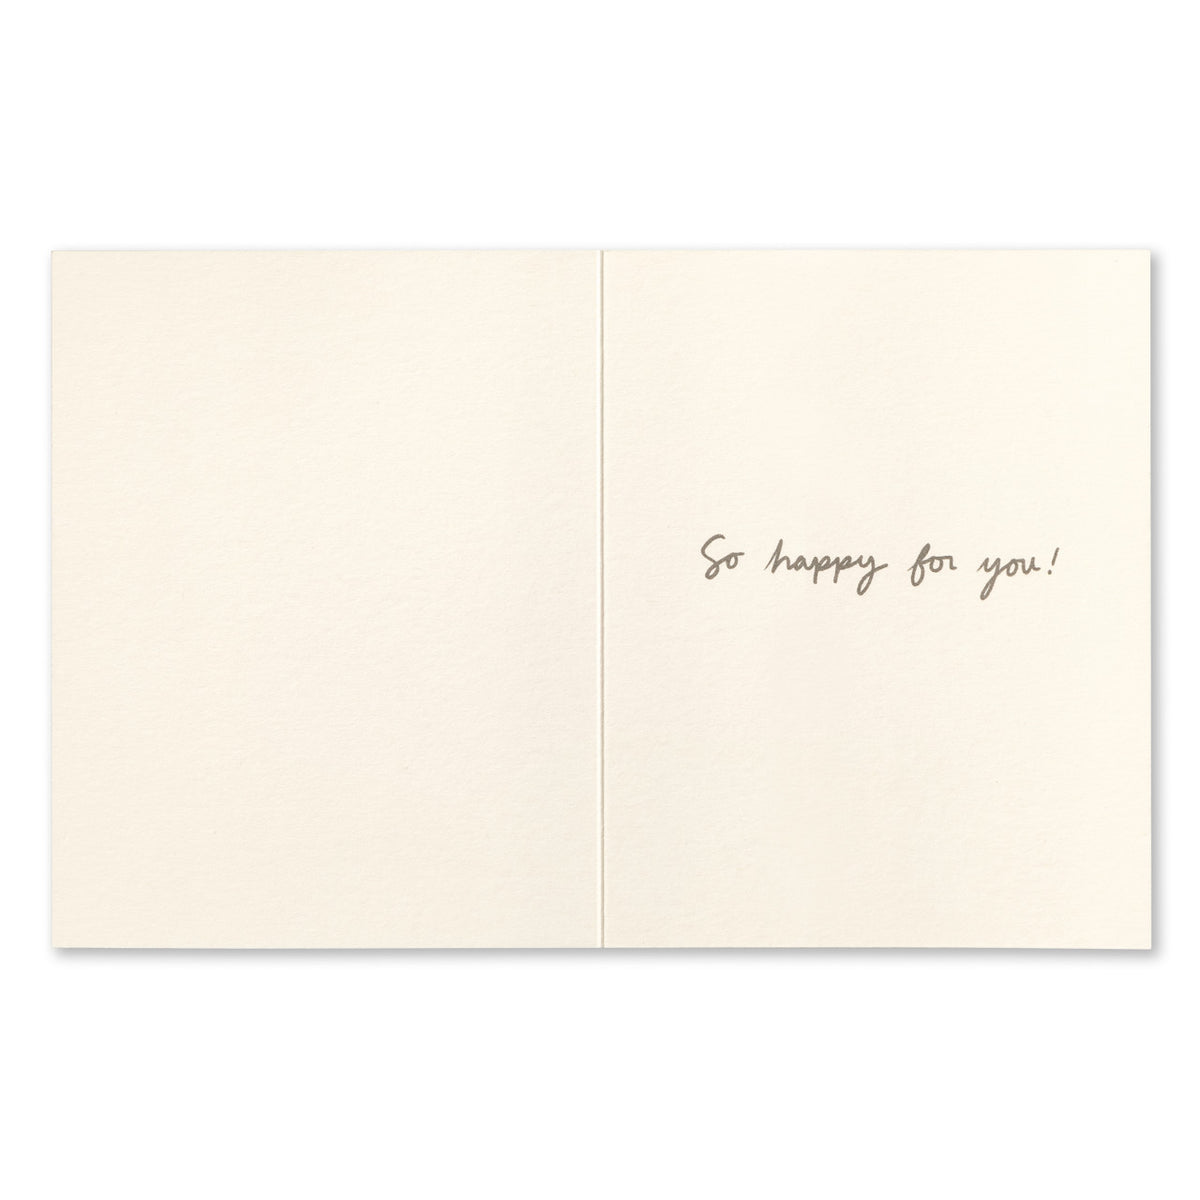 WEDDING CARD – THIS IS LOVE.